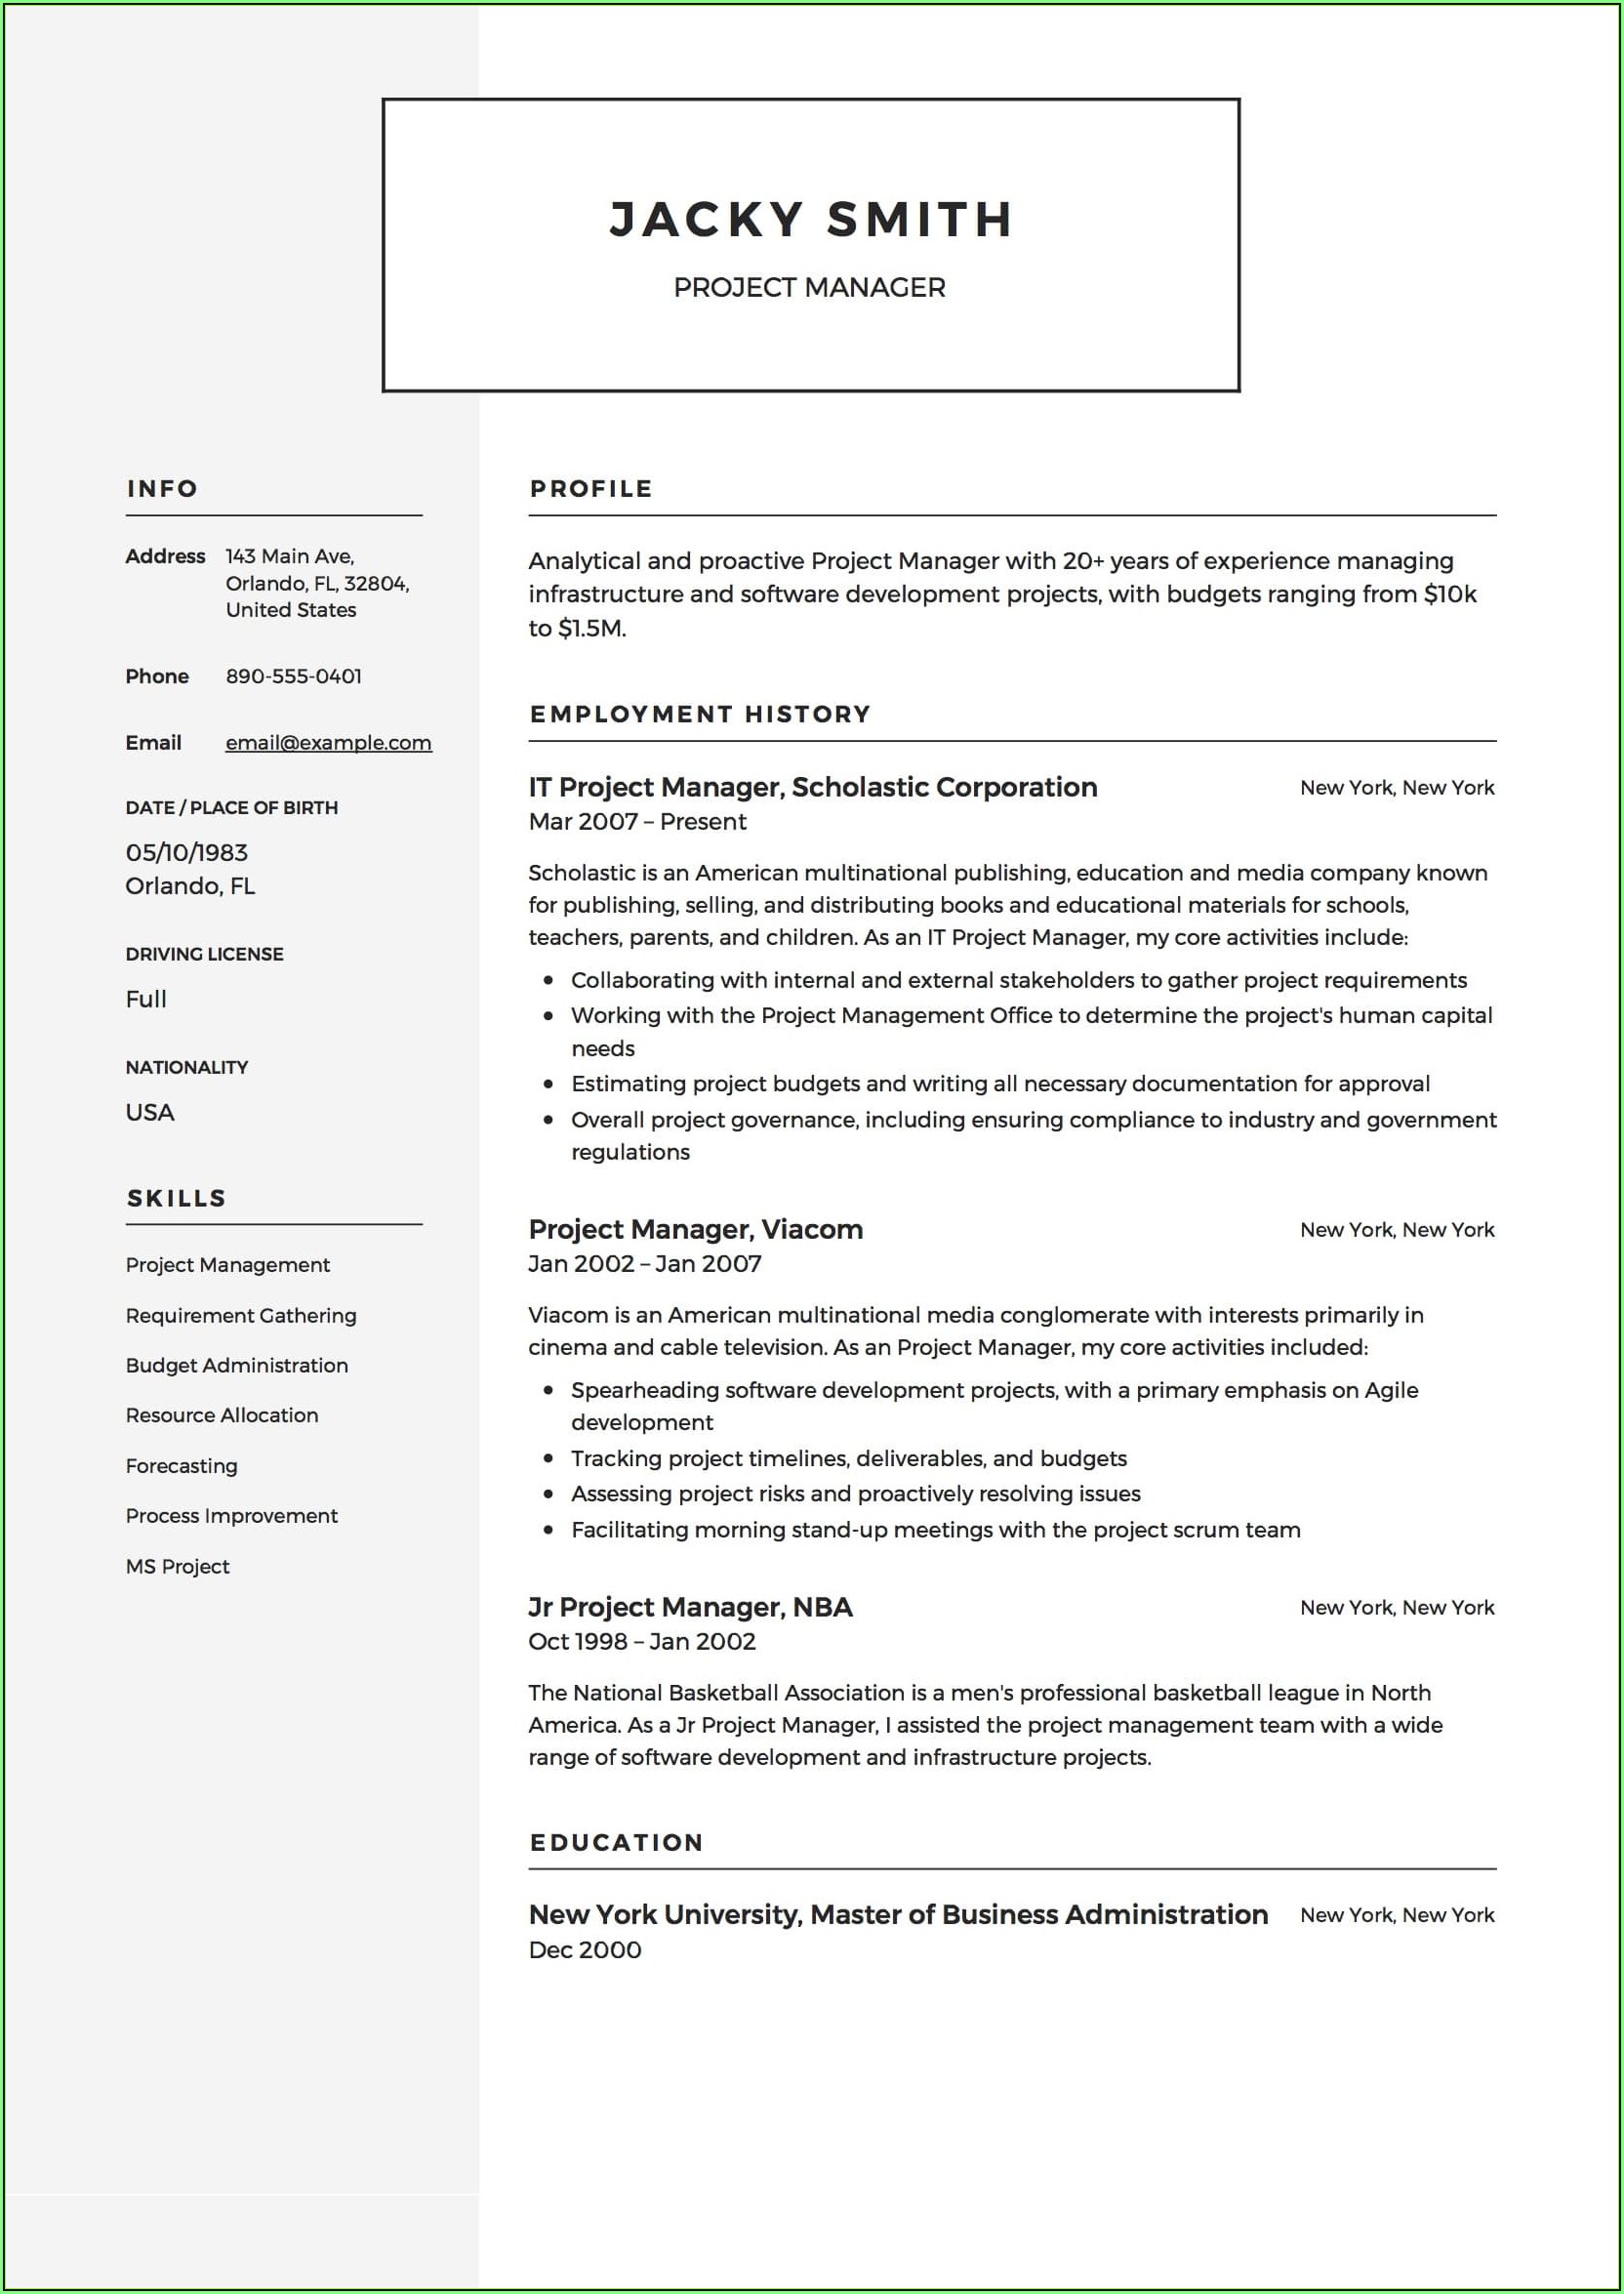 Free Construction Manager Resume Template Microsoft Word